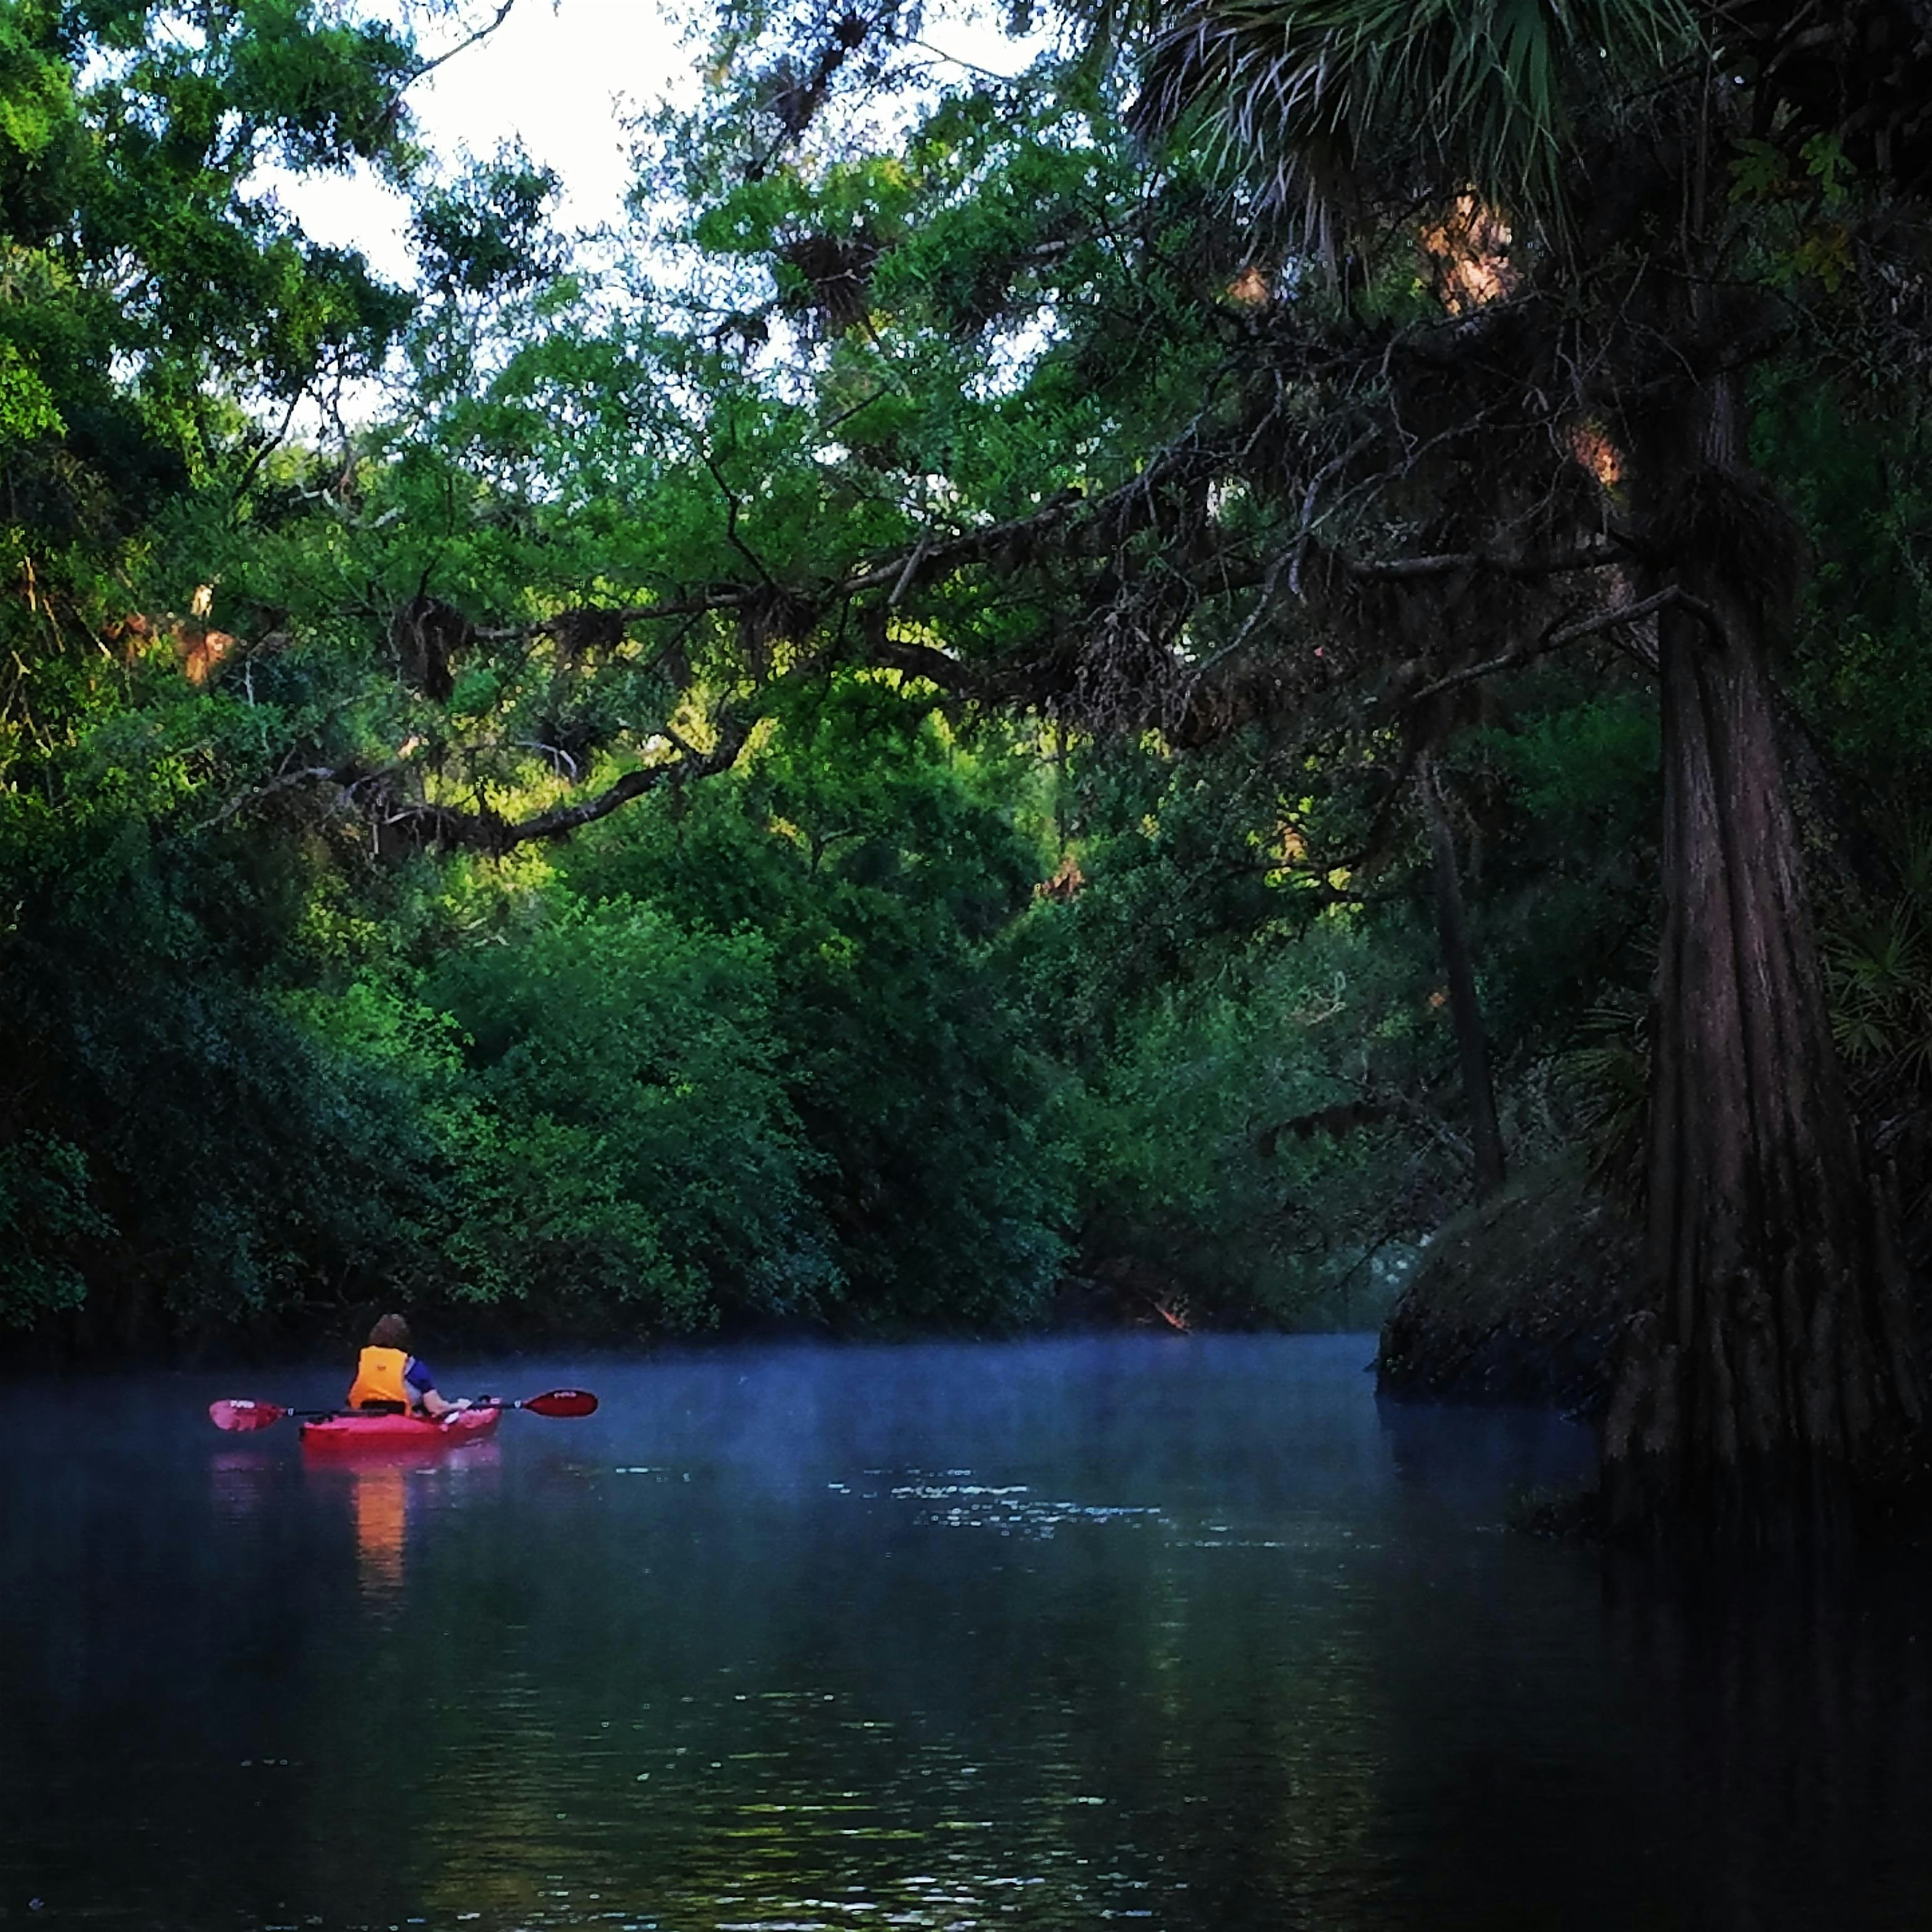 Get Back Into the Wild! Withlacoochee River